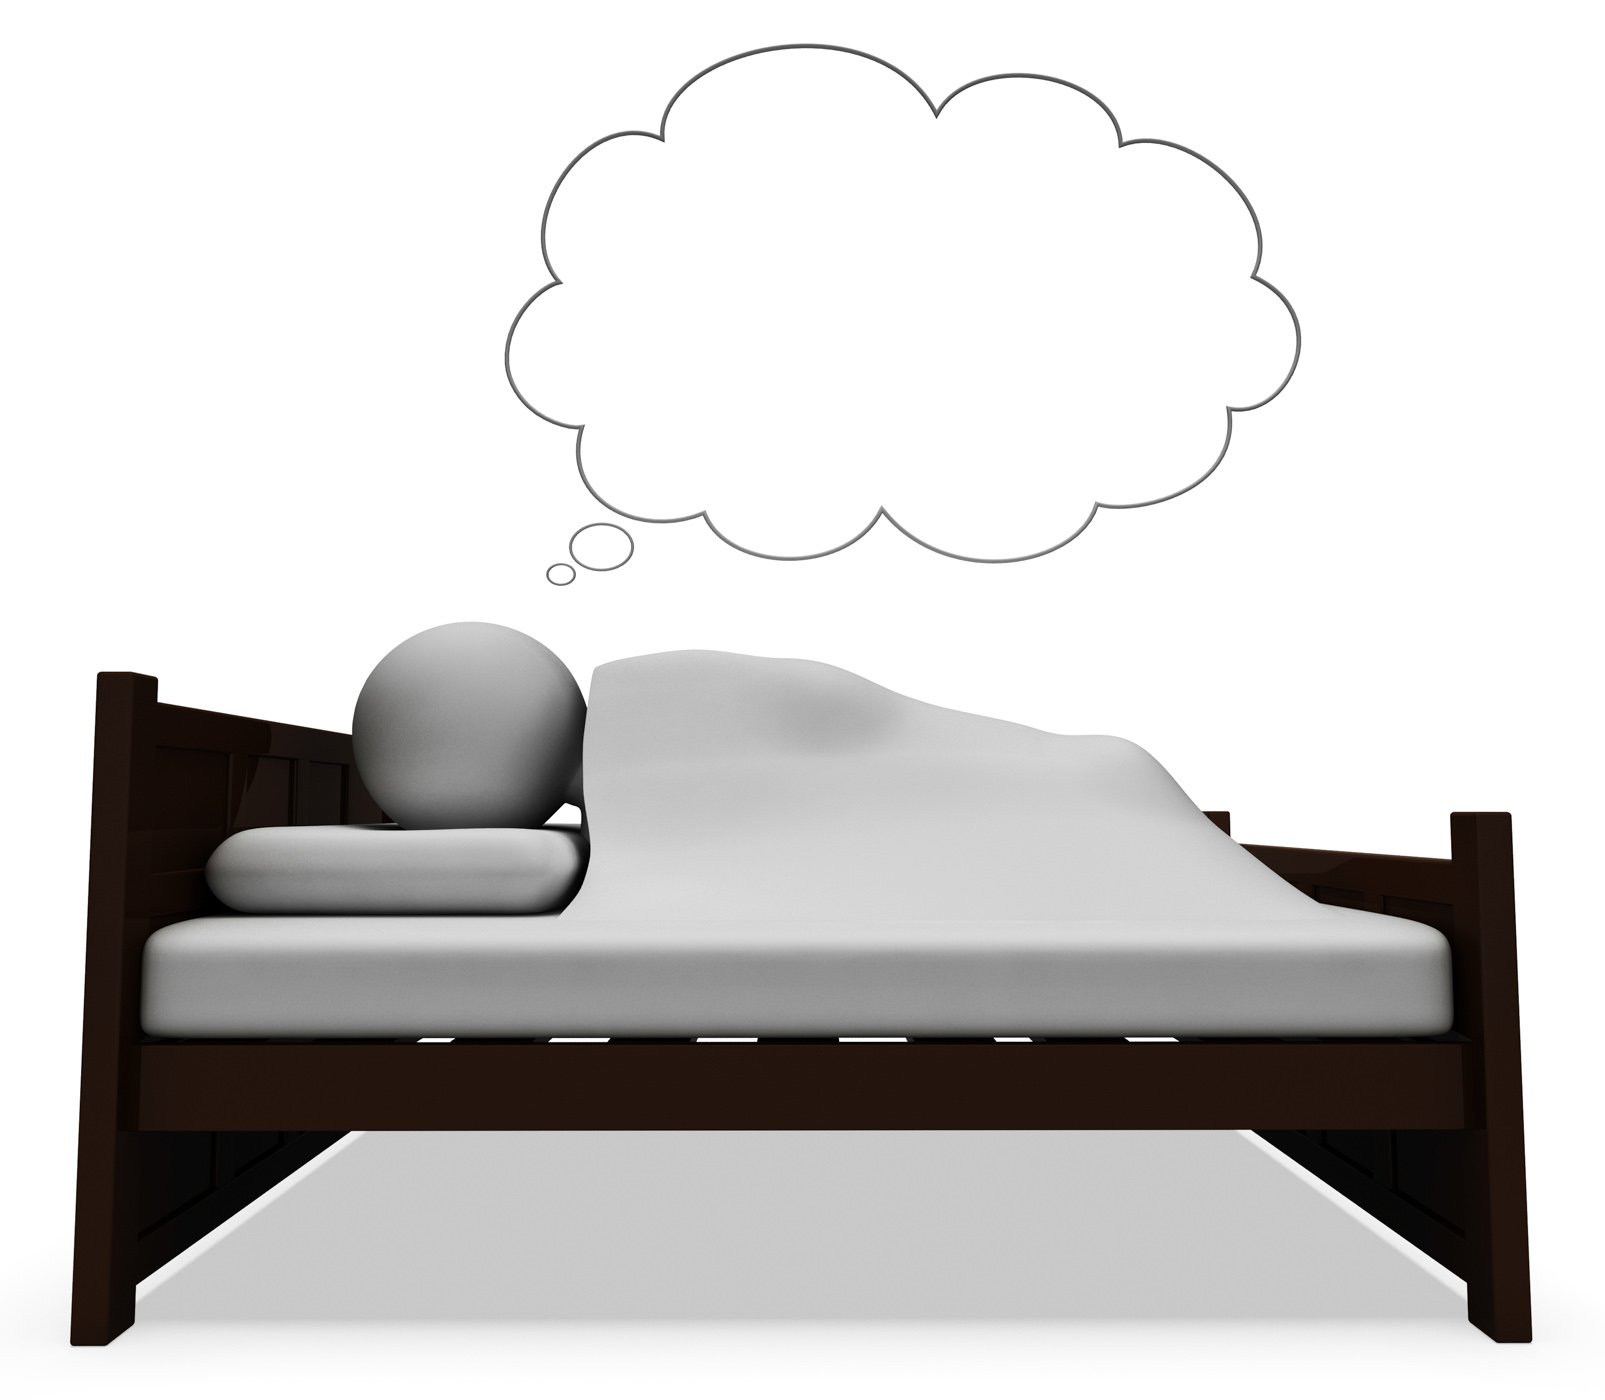 Character dream shows go to bed and bedroom 3d rendering photo